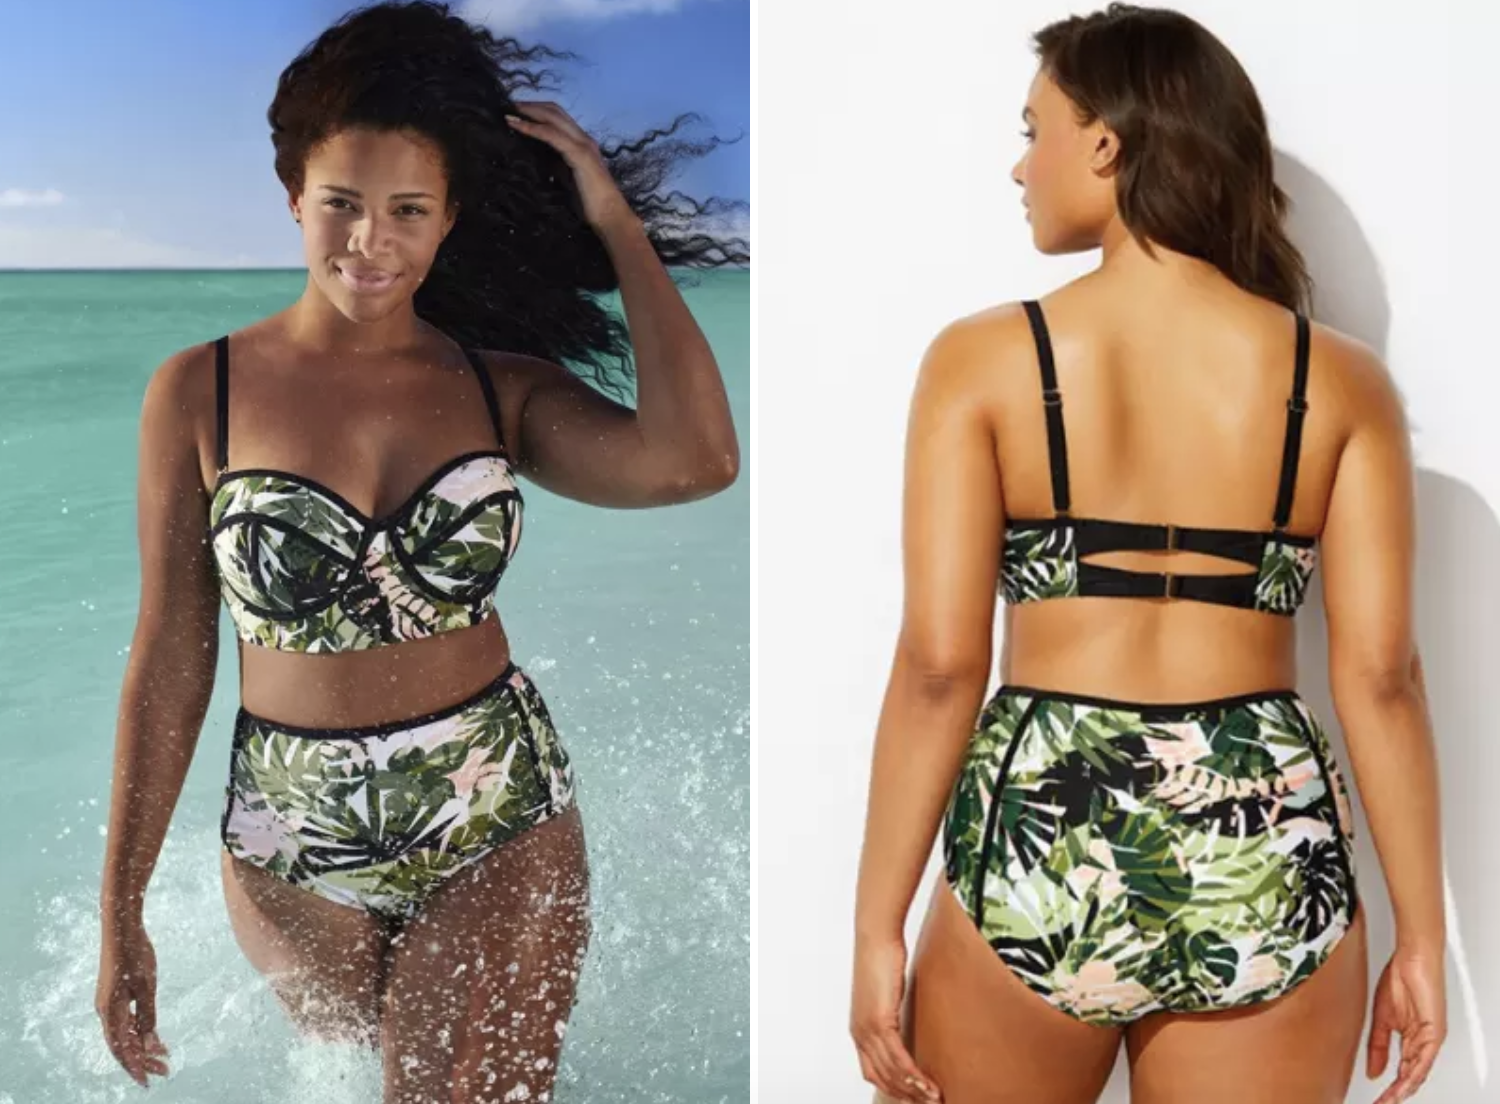 front and back view of the bikini with high-waisted bottoms and underwire bustier top in green, white, and black leaf print